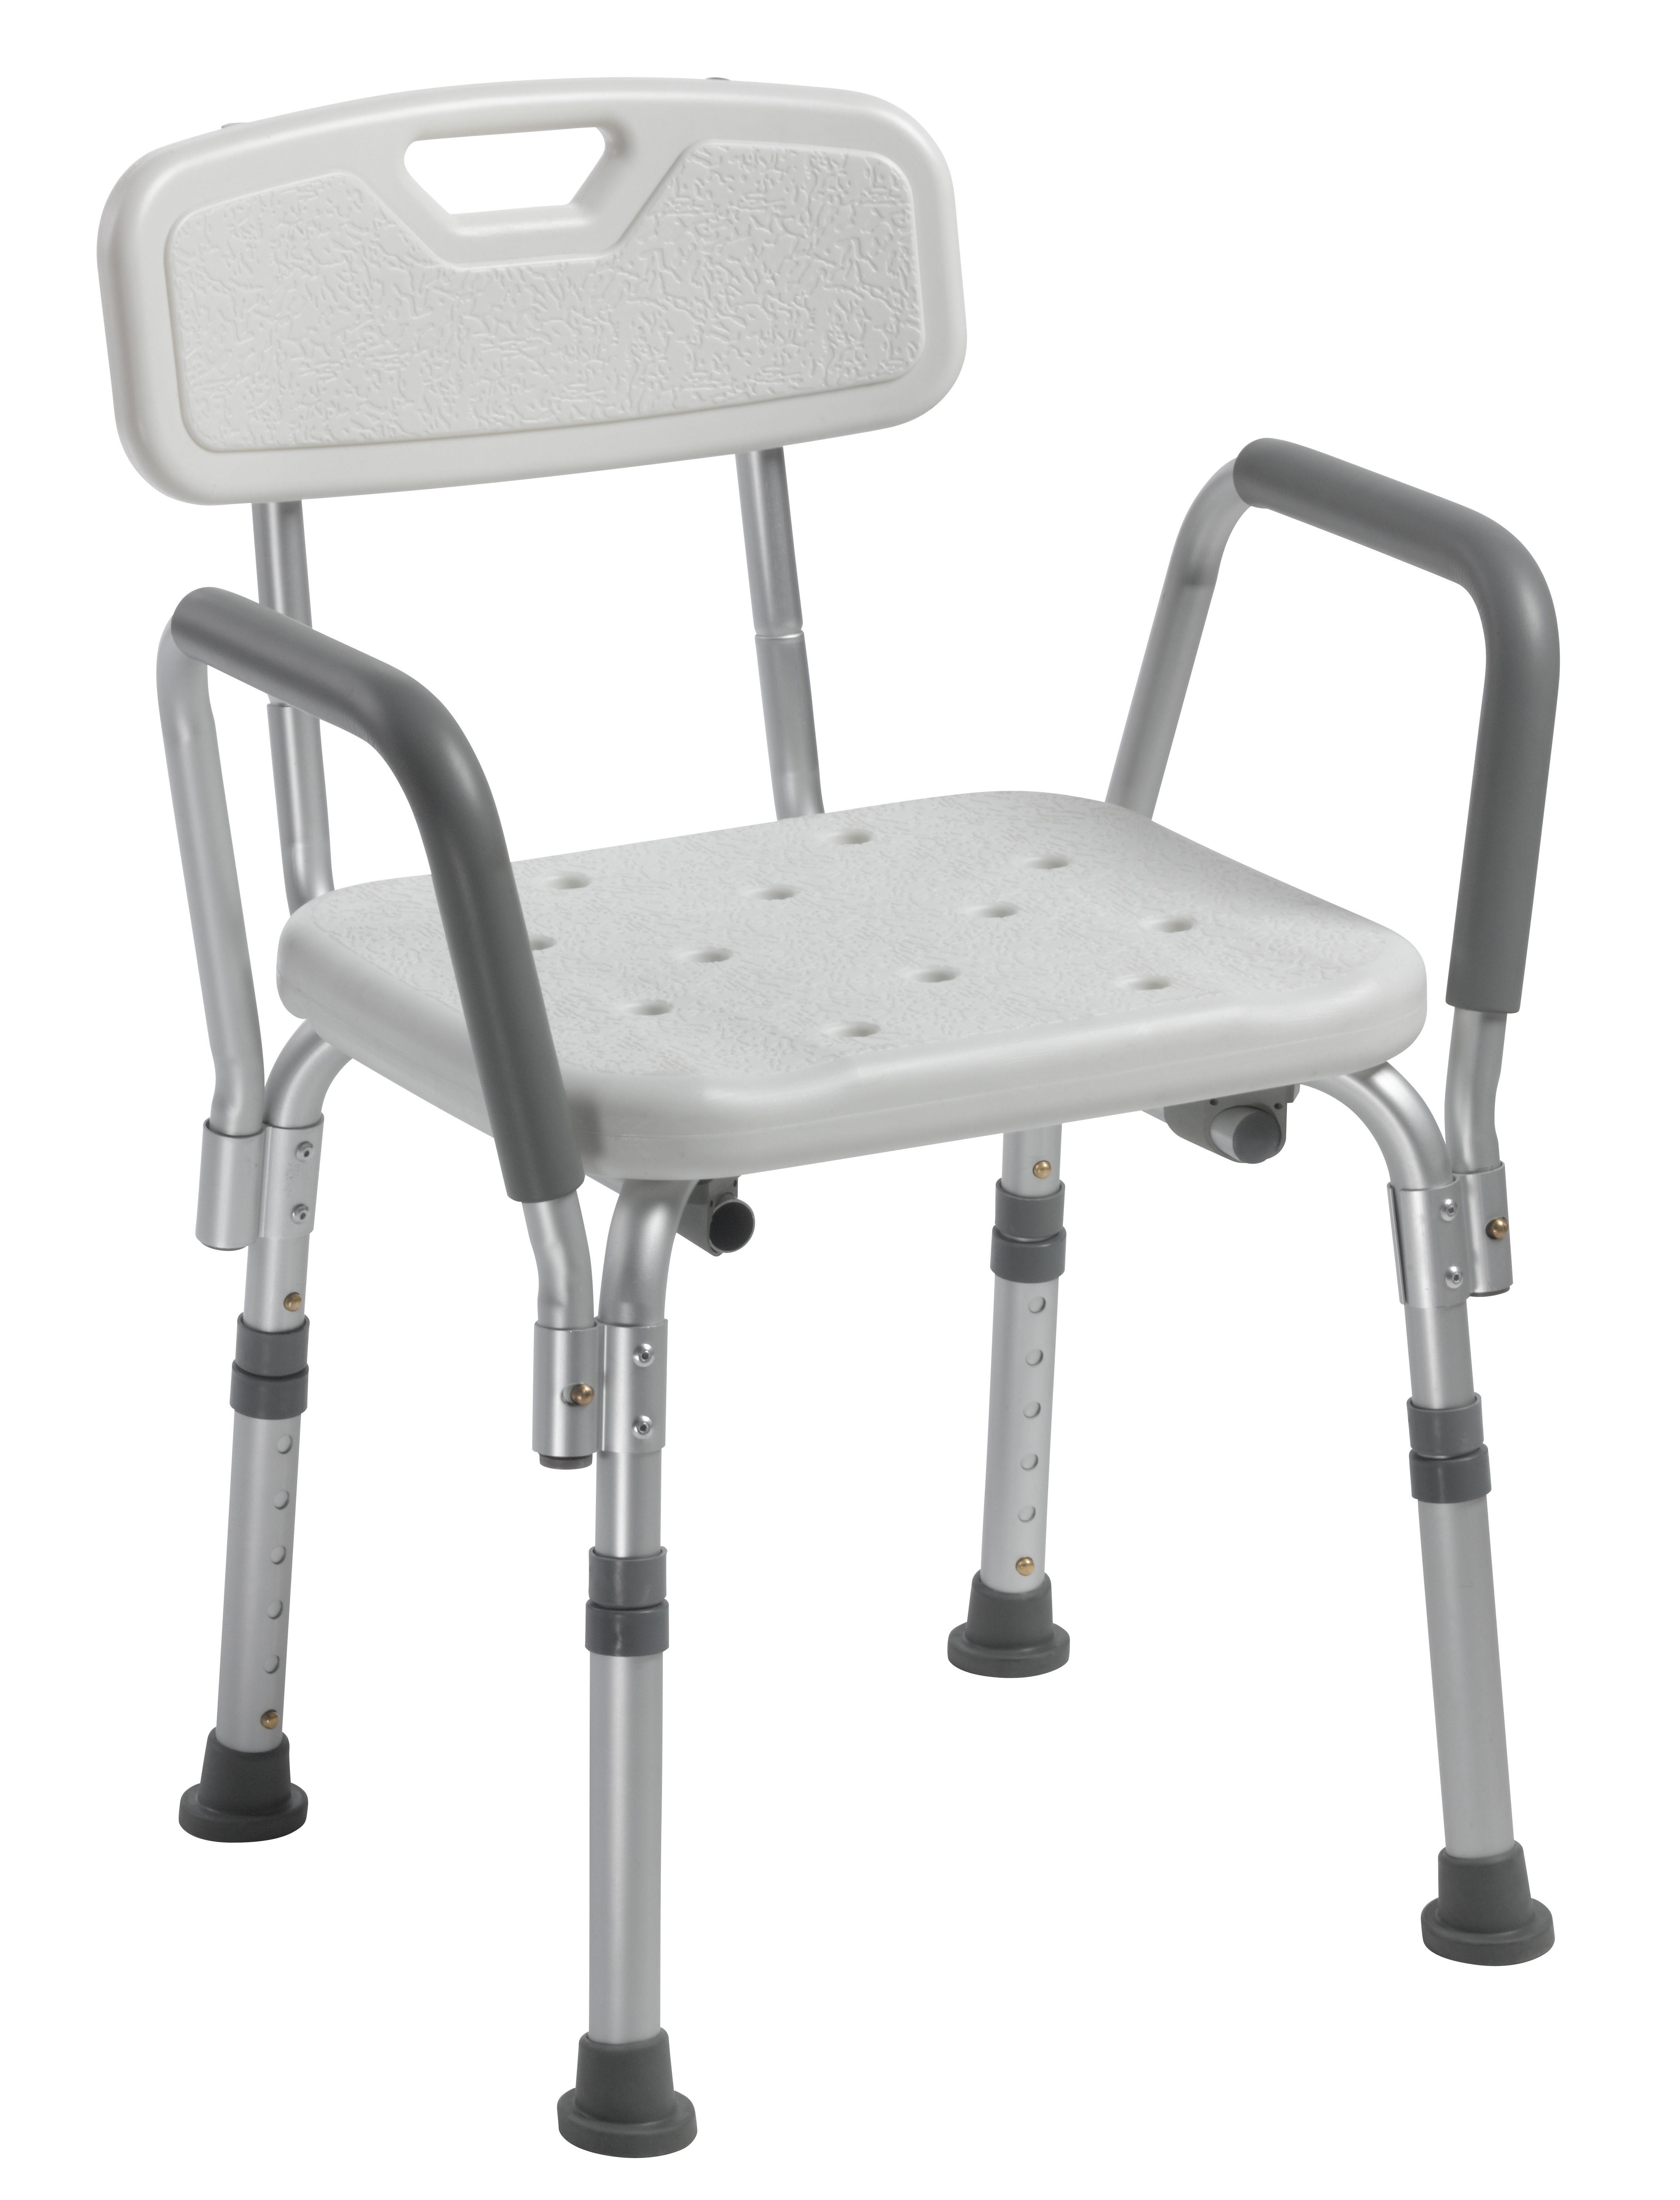 shower chair with arms kd